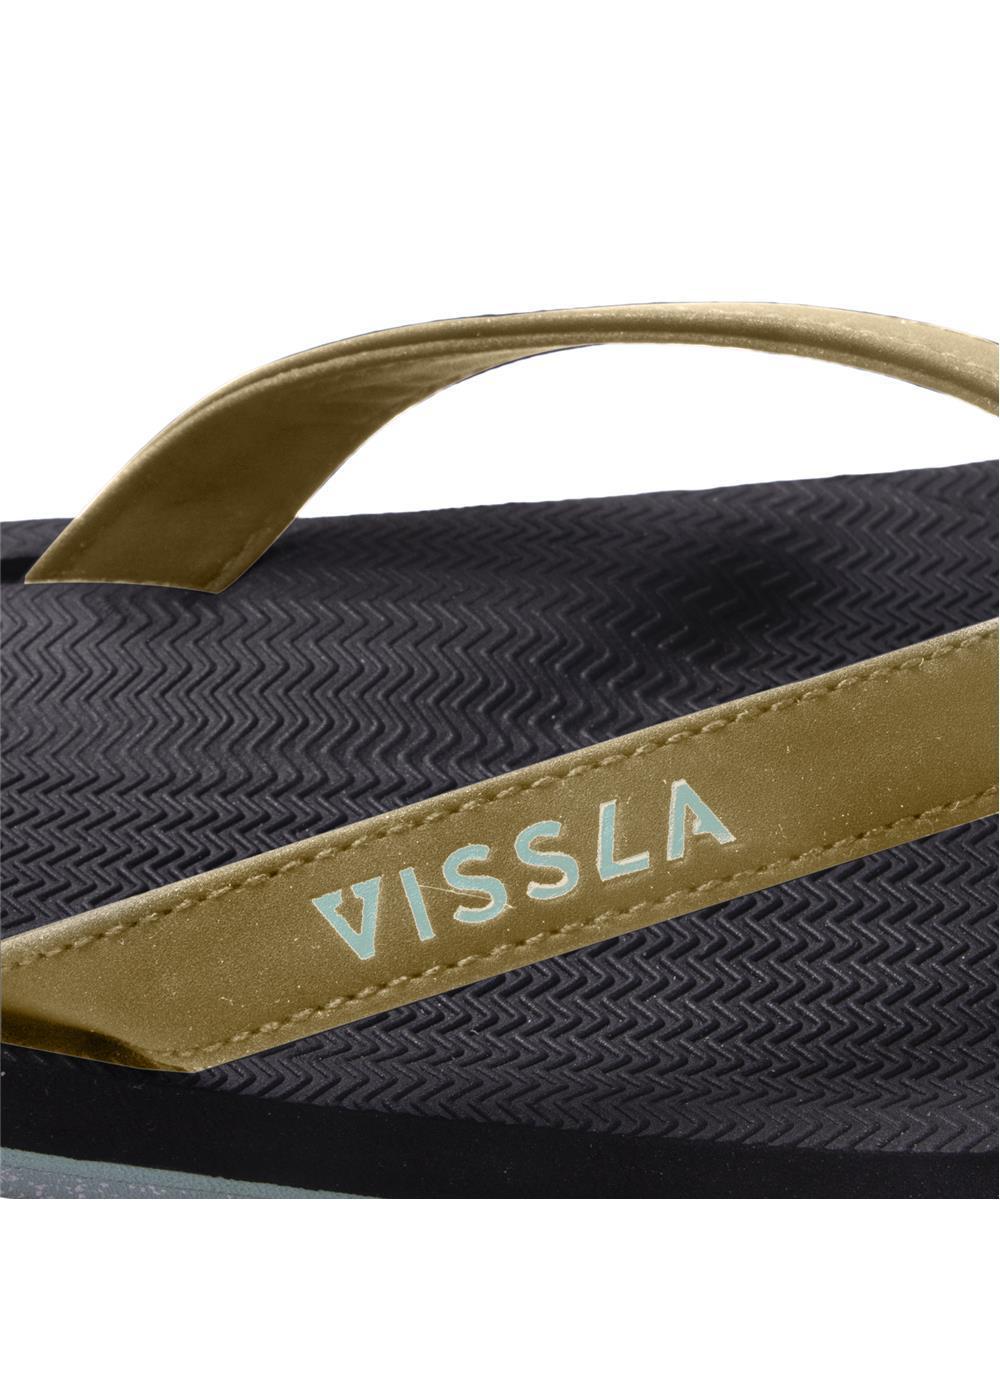 Vissla Sandals with a Black Base, Brown Toe Thong, and White Lettering